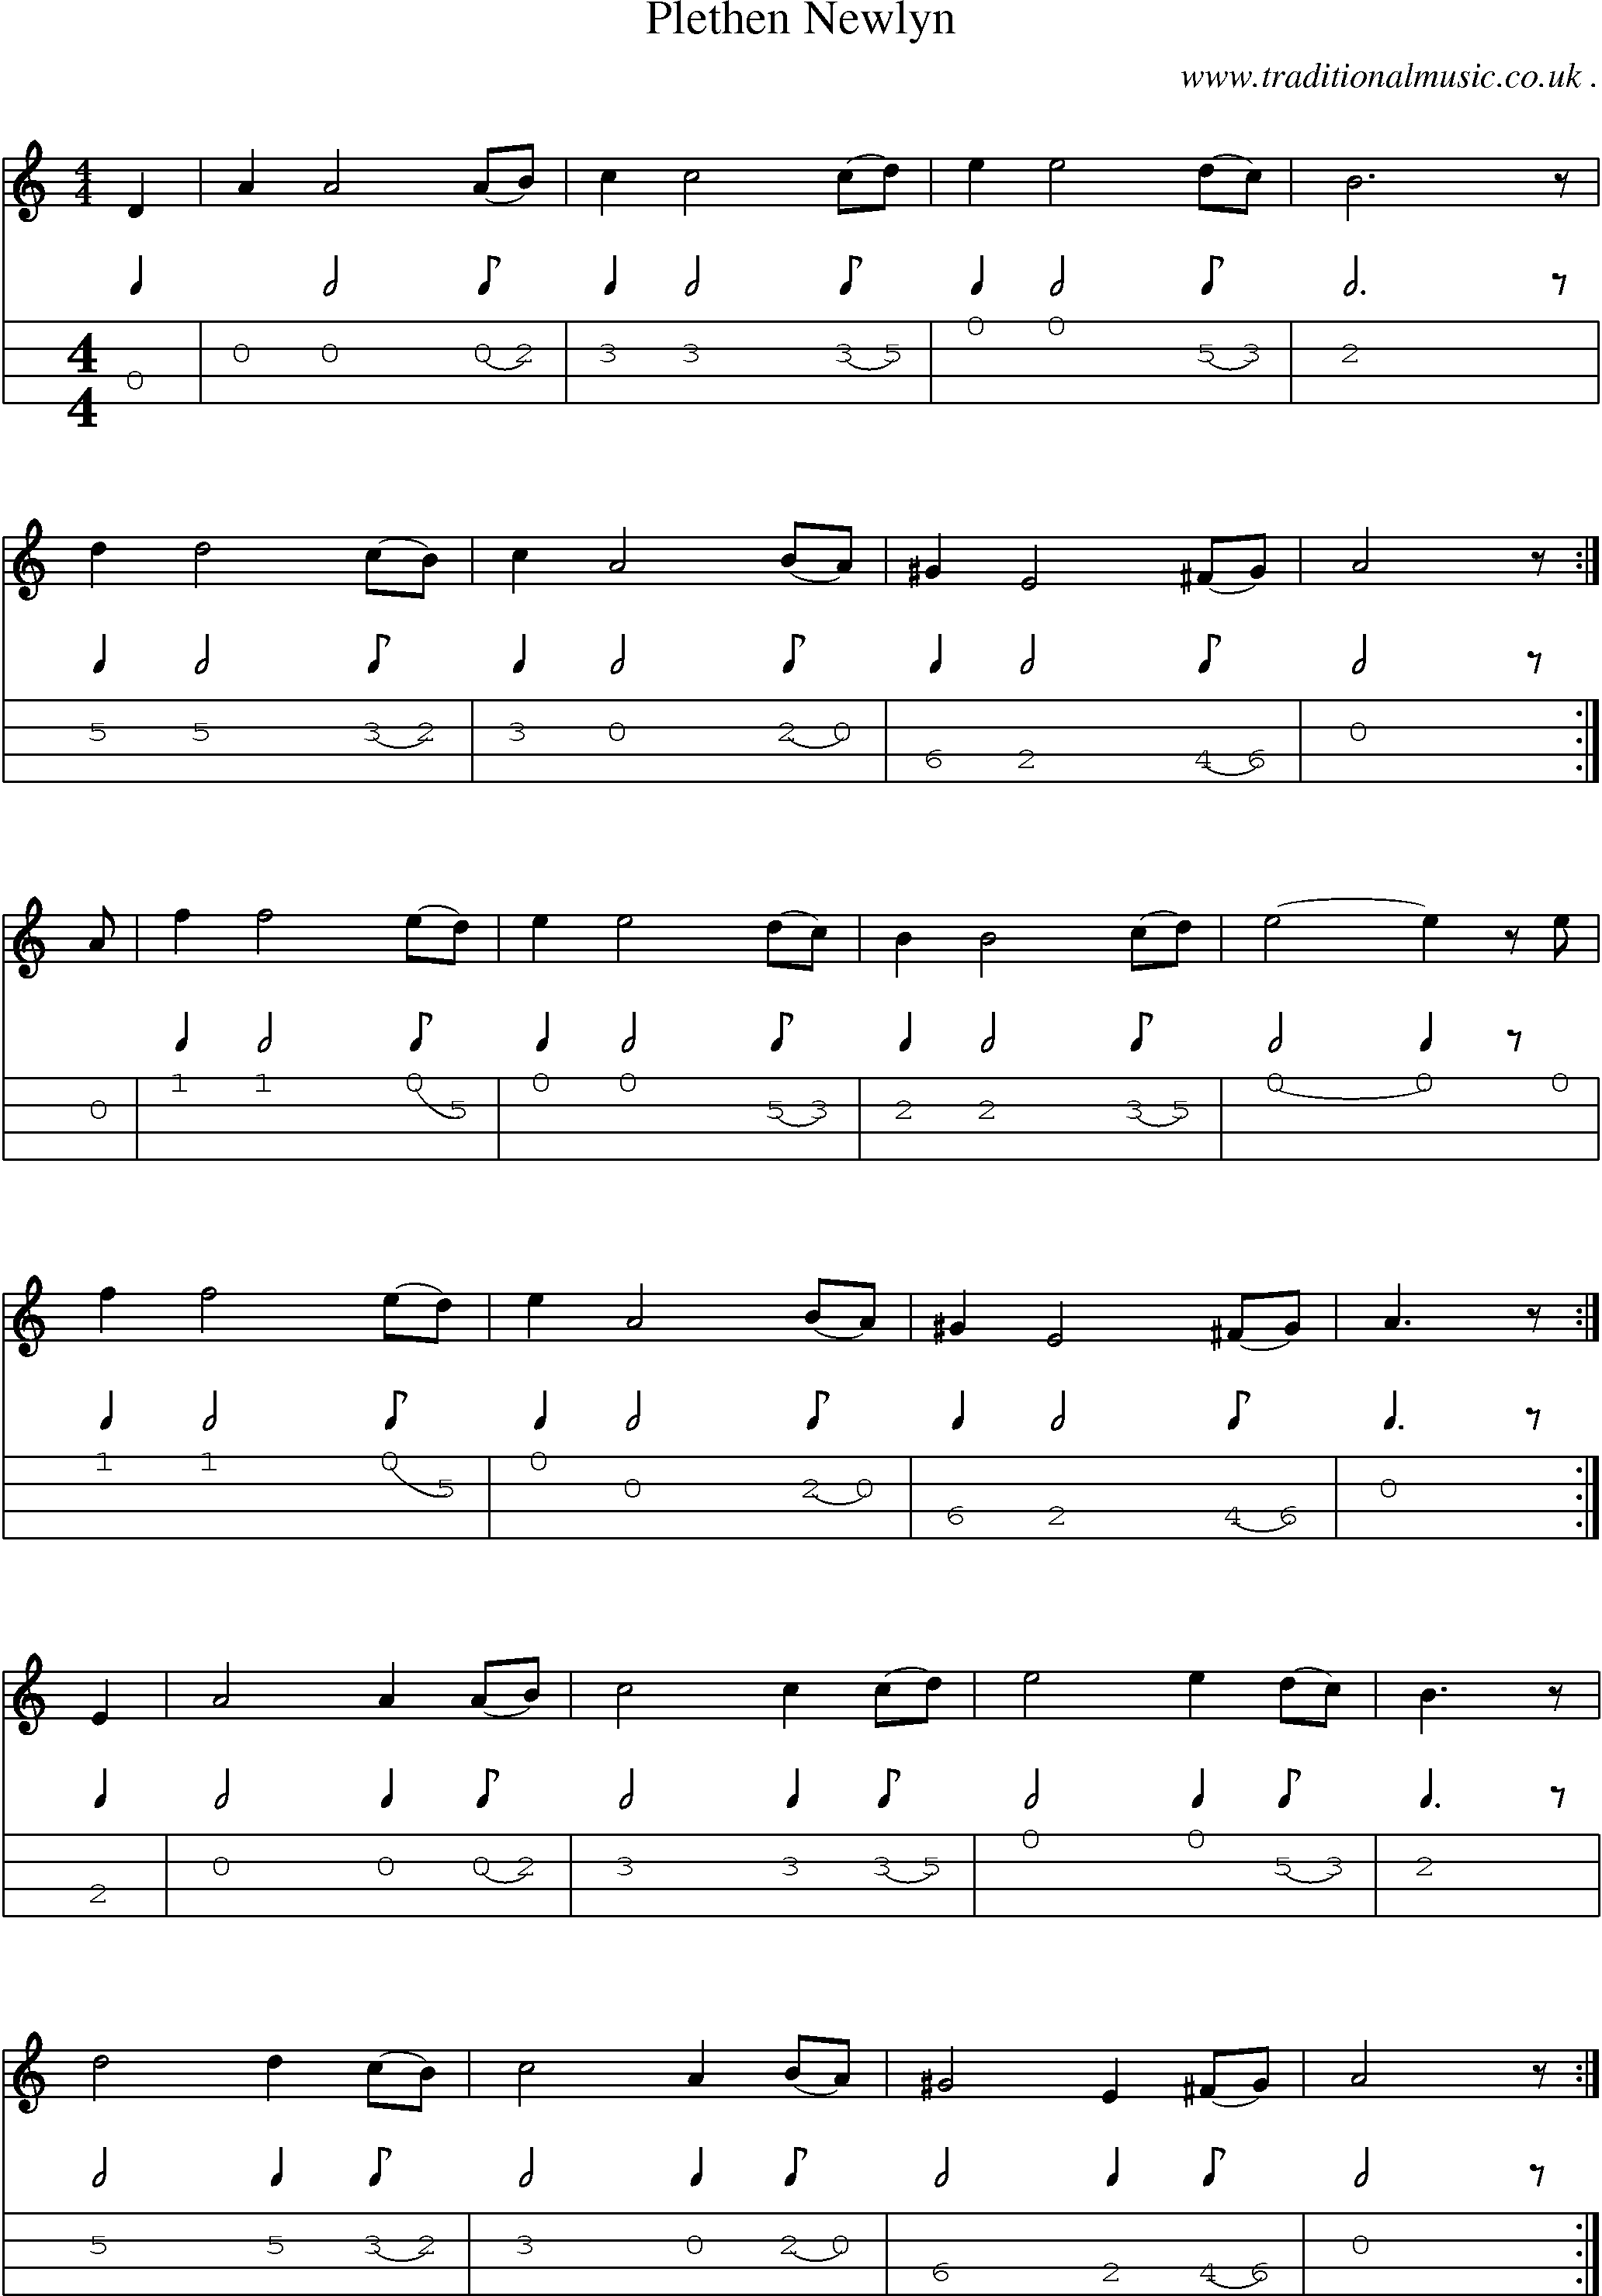 Sheet-Music and Mandolin Tabs for Plethen Newlyn